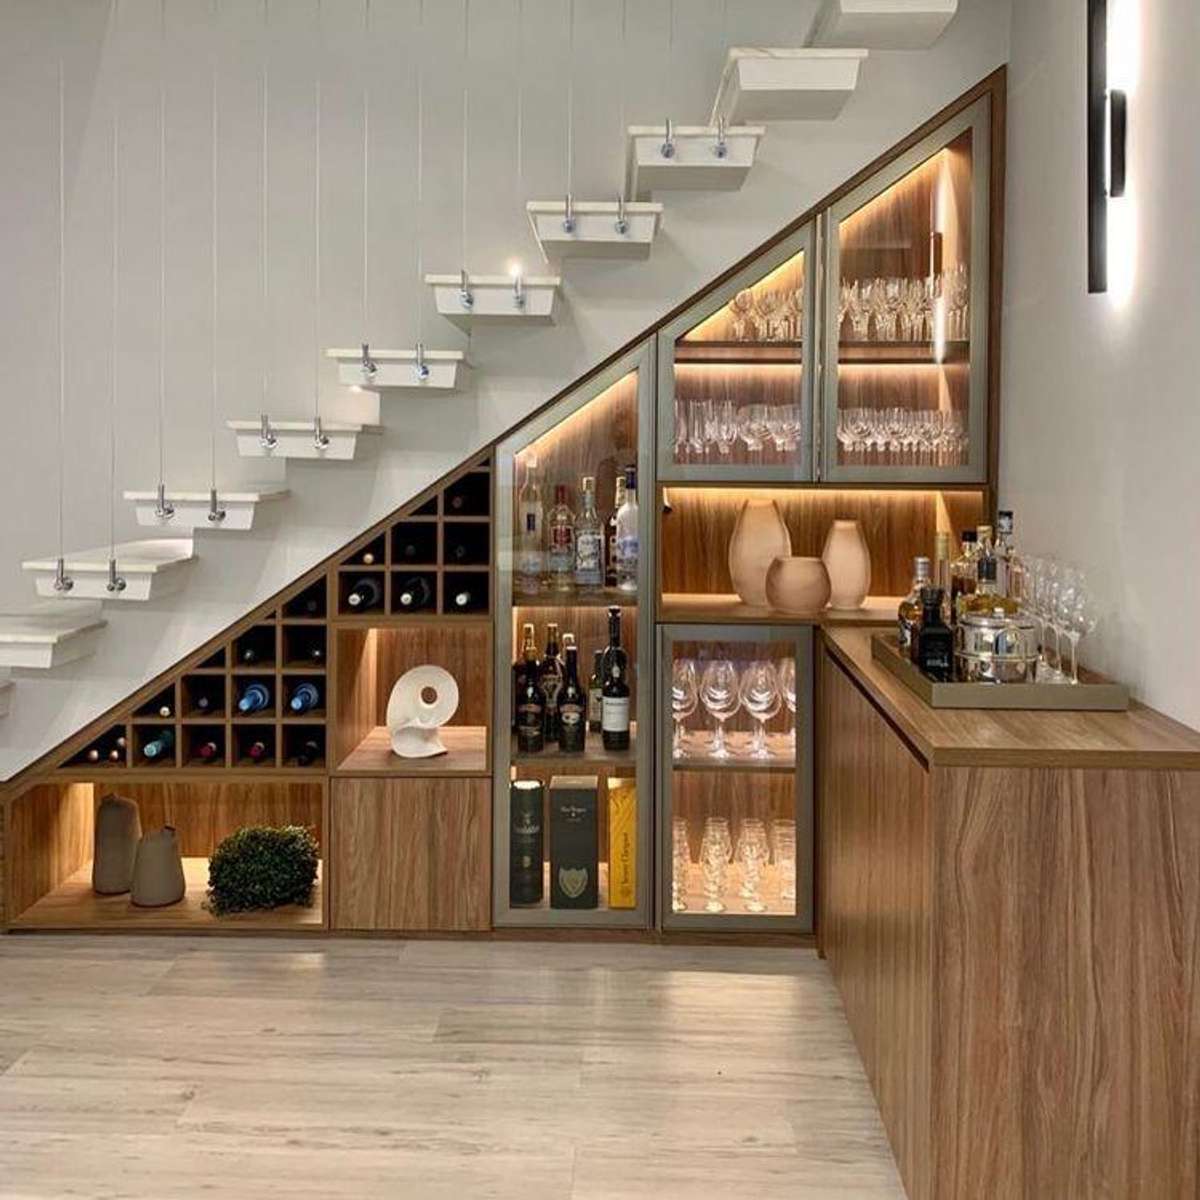 Ideas to utilise space under staircase. For architectural plans    and Interior design contact us @A&P Projects
#Architect #InteriorDesigner #StaircaseDecors #creative #HouseConstruction #callon8287002506